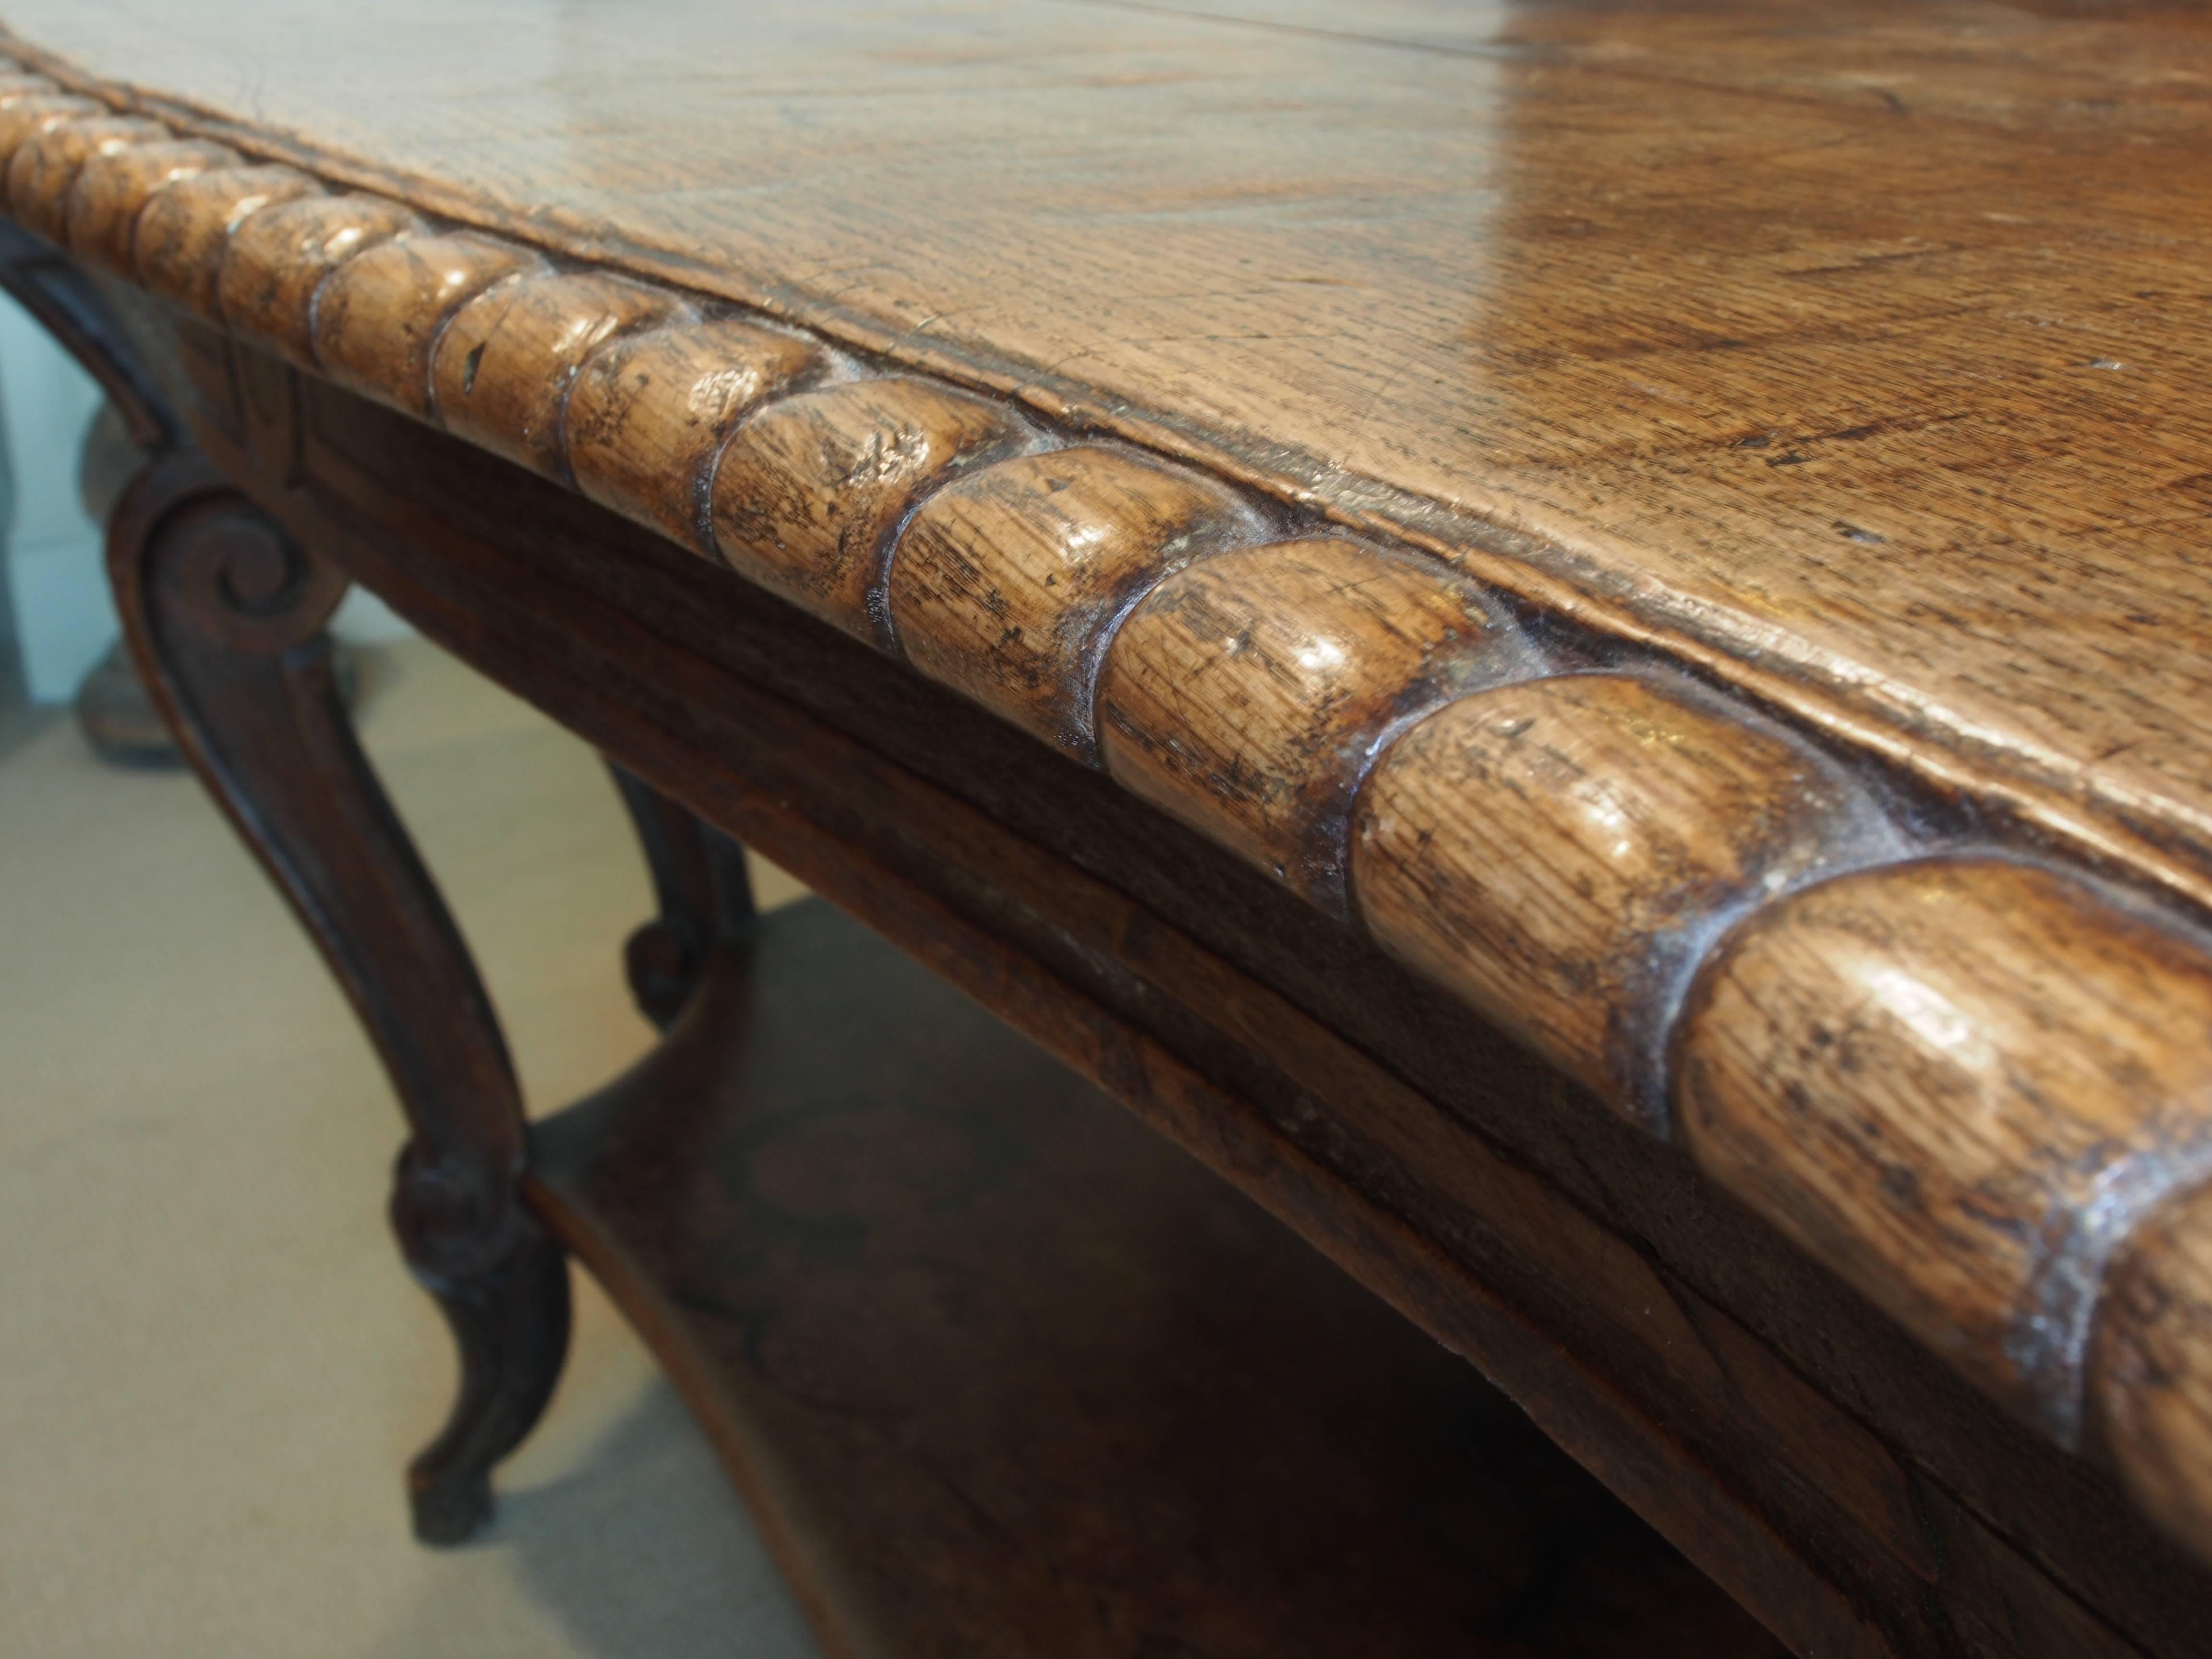 Italian Walnut Carved Table, 19th Century, with 8 Curved Legs and Low Shelf In Good Condition For Sale In Atlanta, GA